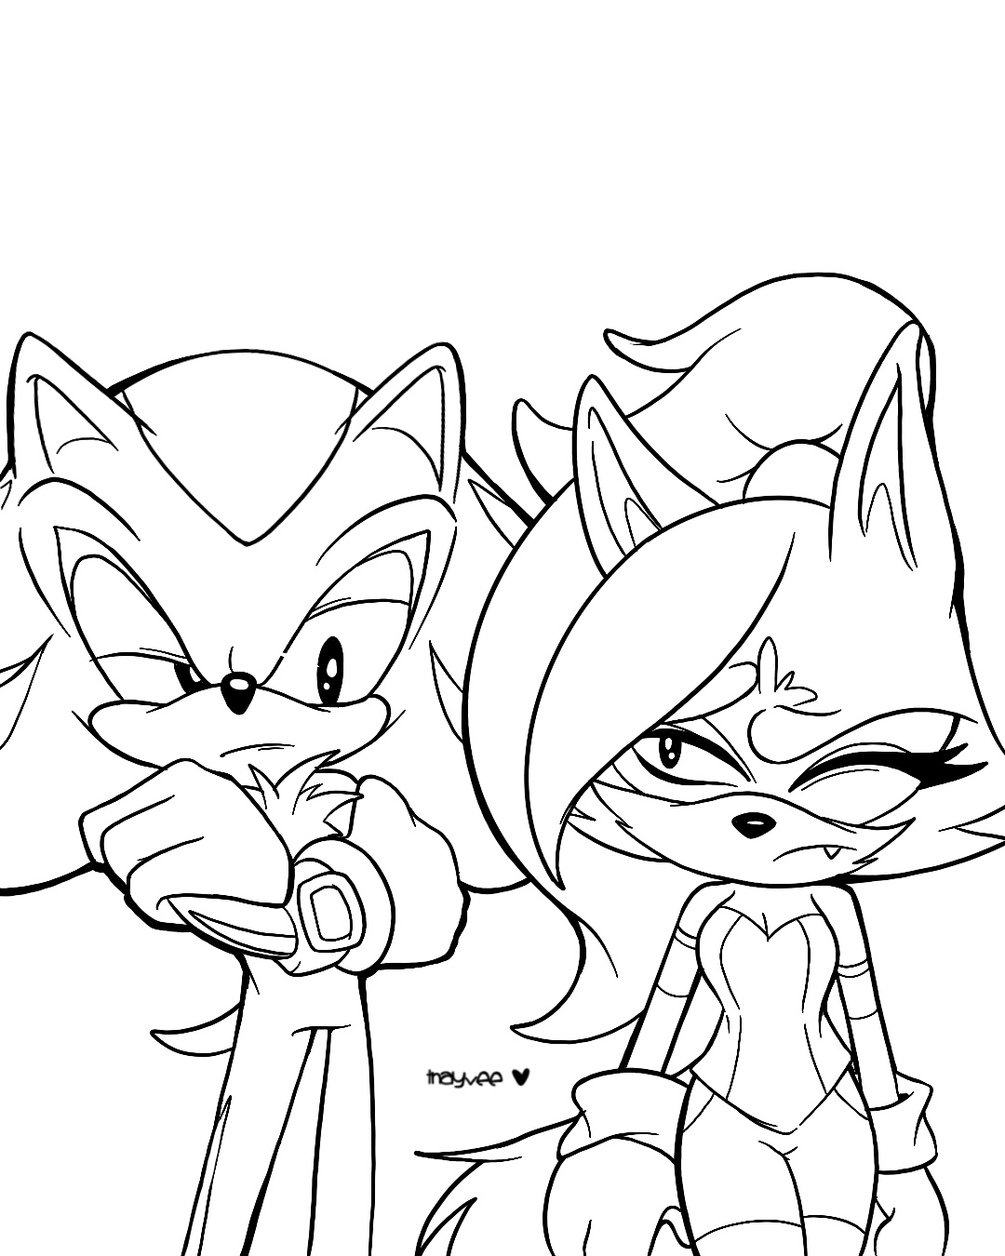 Sonic th anniversary challenge coloring pages